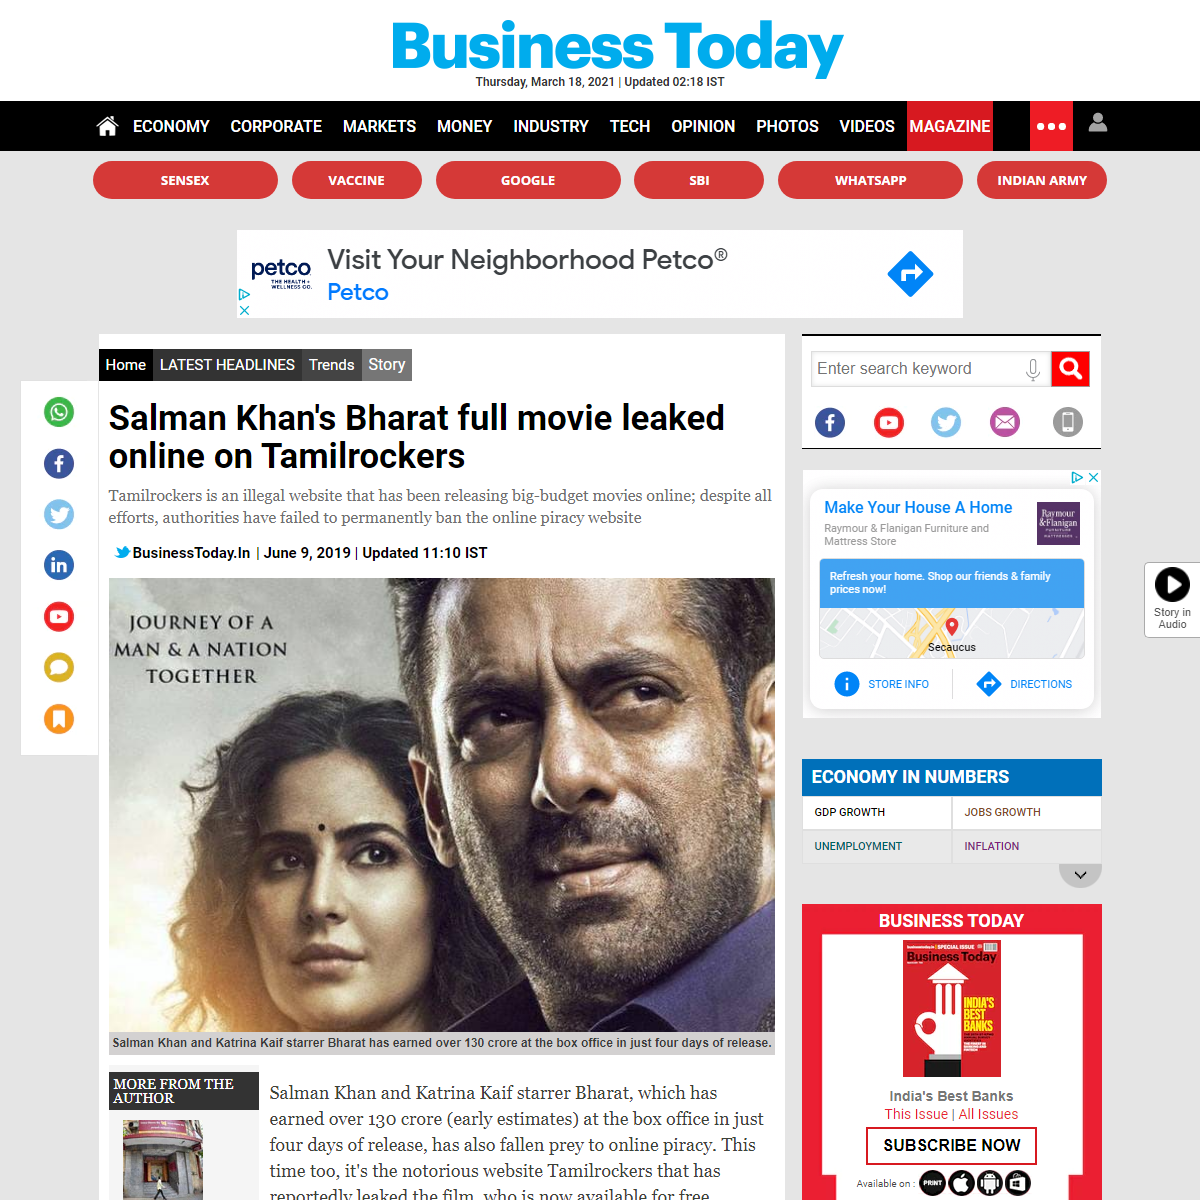 A complete backup of https://www.businesstoday.in/latest/trends/bharat-full-movie-leaked-online-free-download-tamilrockers-salma